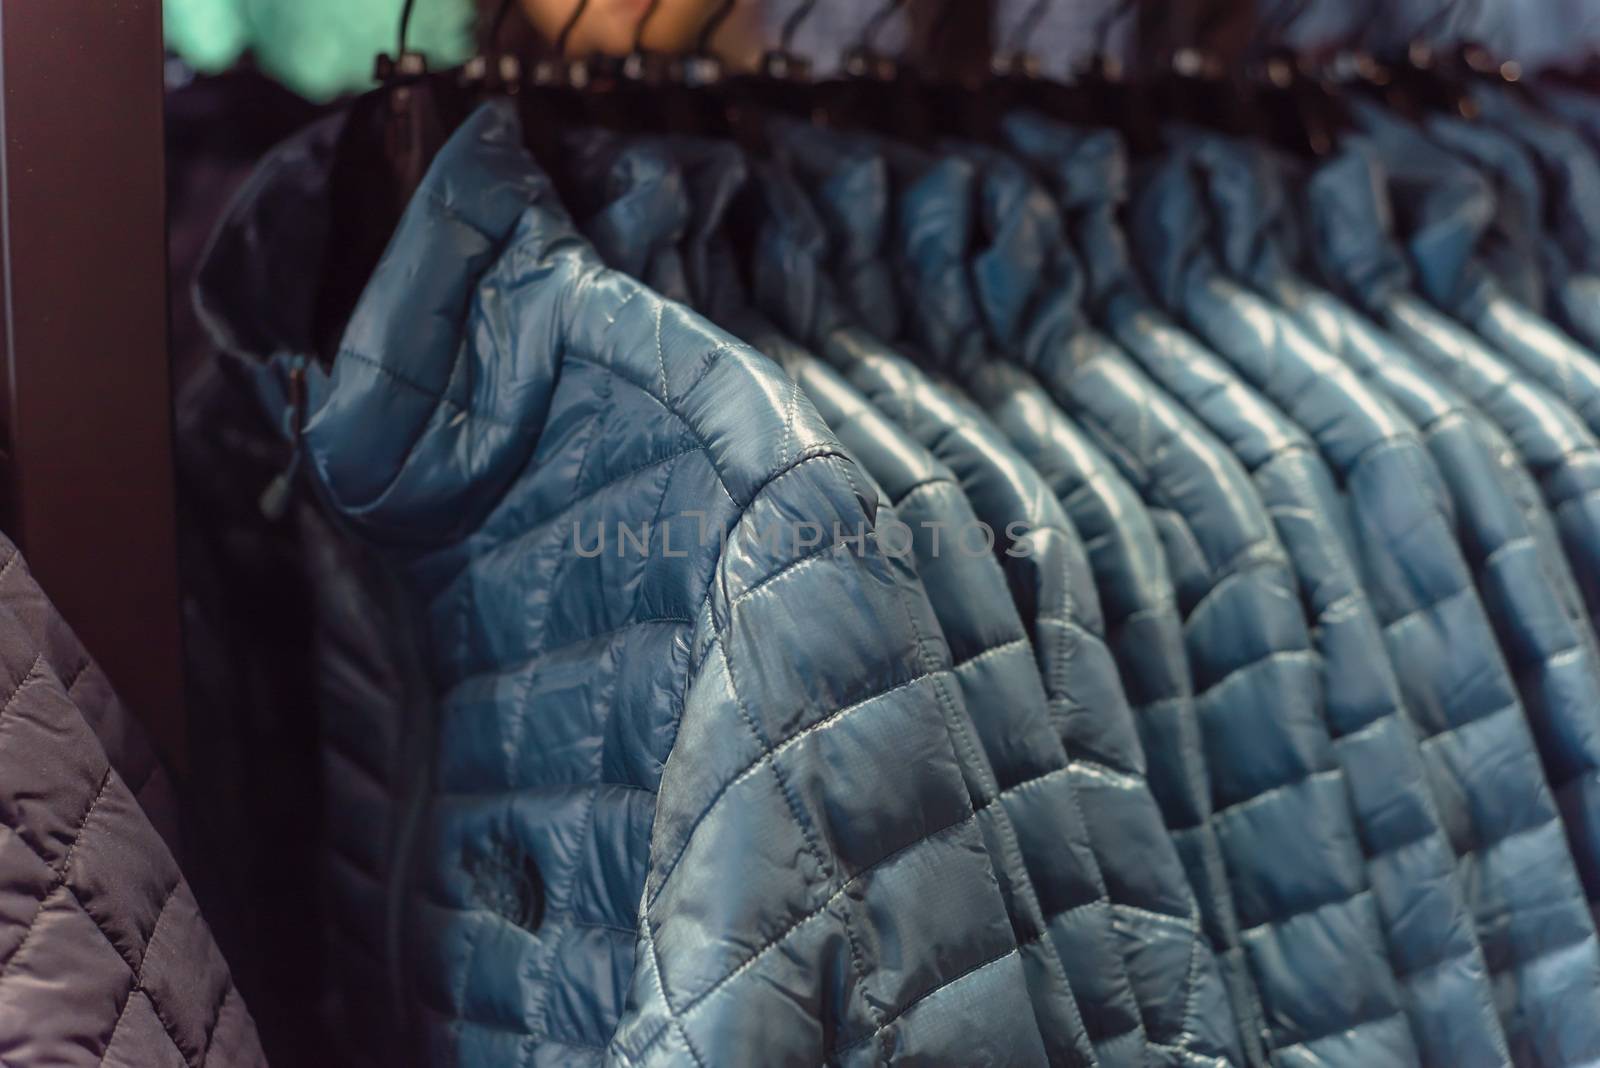 Row of women down jackets at American outdoor clothing store by trongnguyen